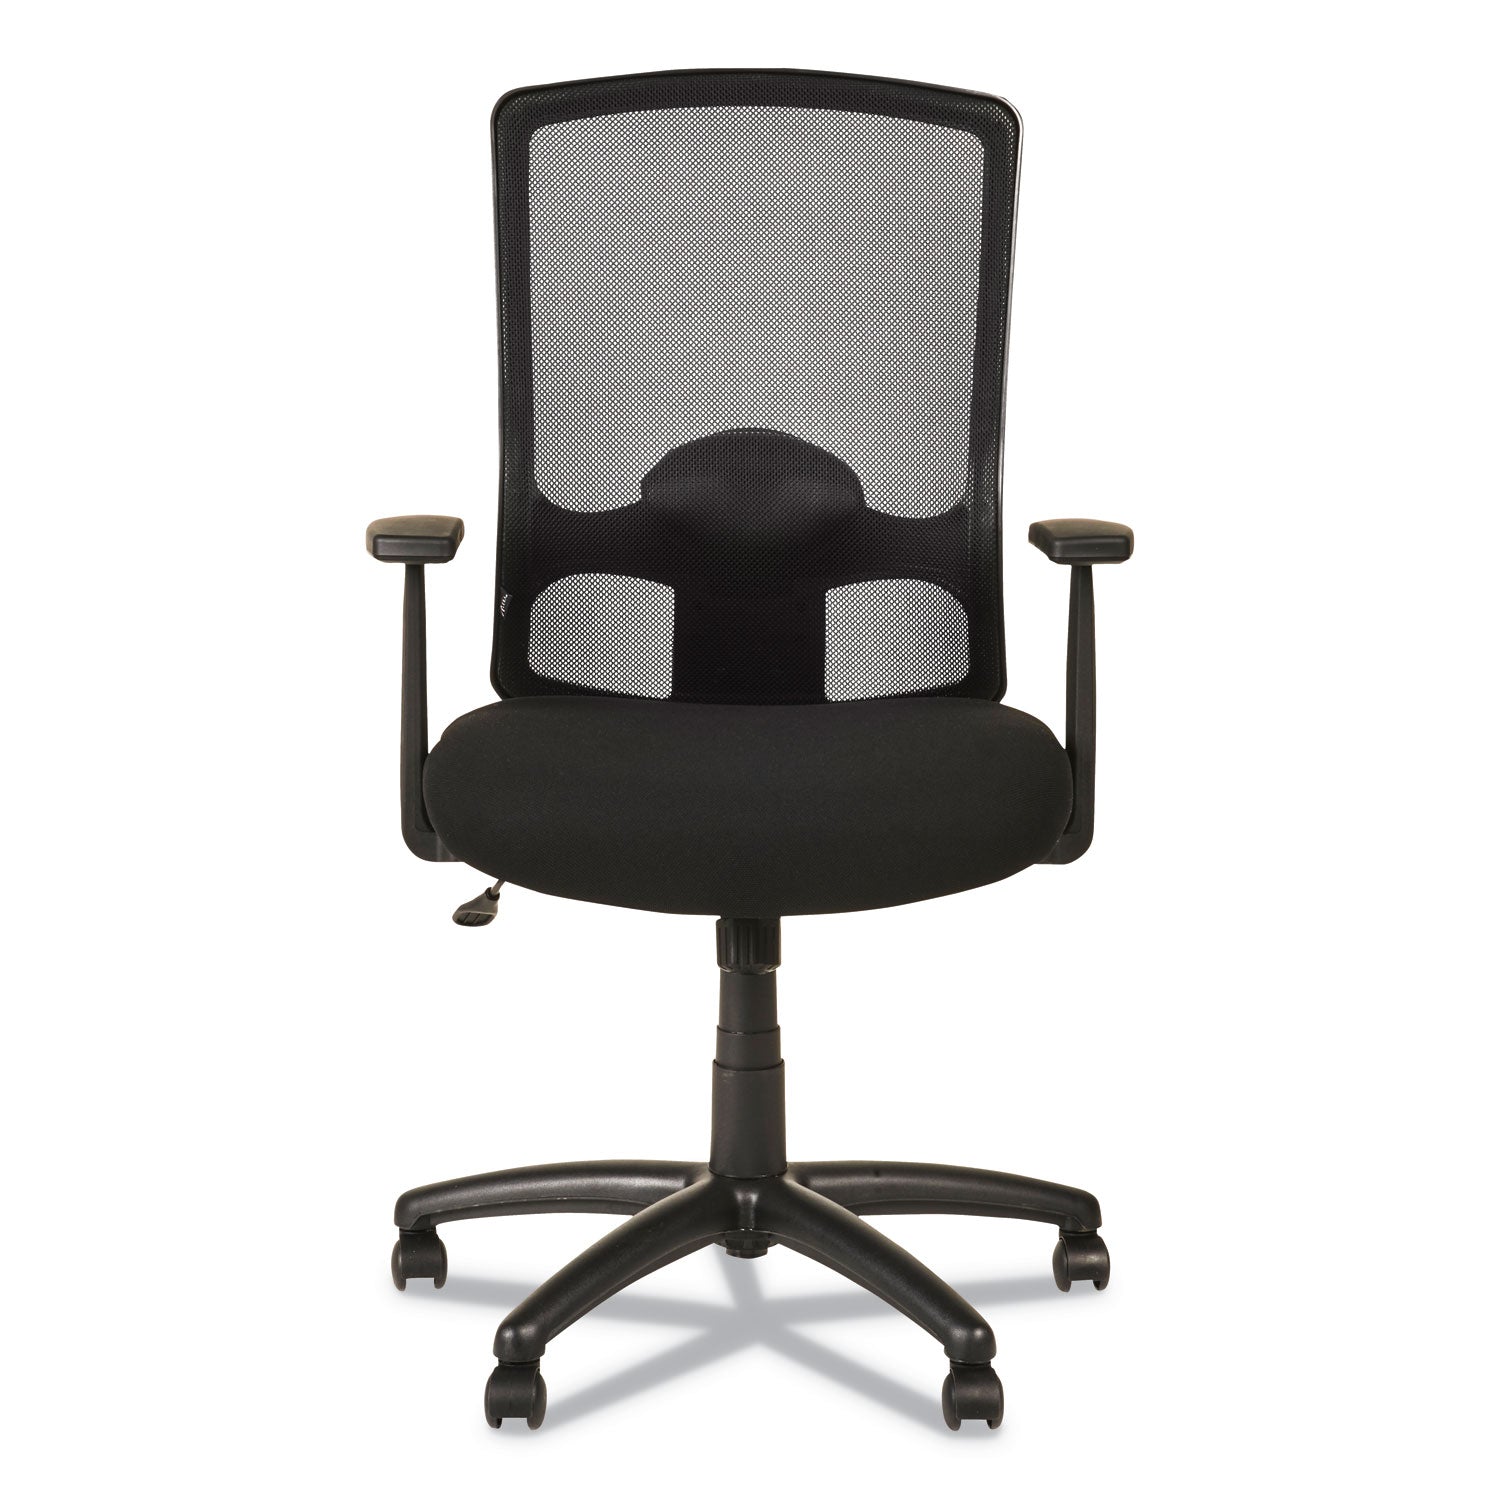 alera-etros-series-high-back-swivel-tilt-chair-supports-up-to-275-lb-1811-to-2204-seat-height-black_aleet4117b - 2